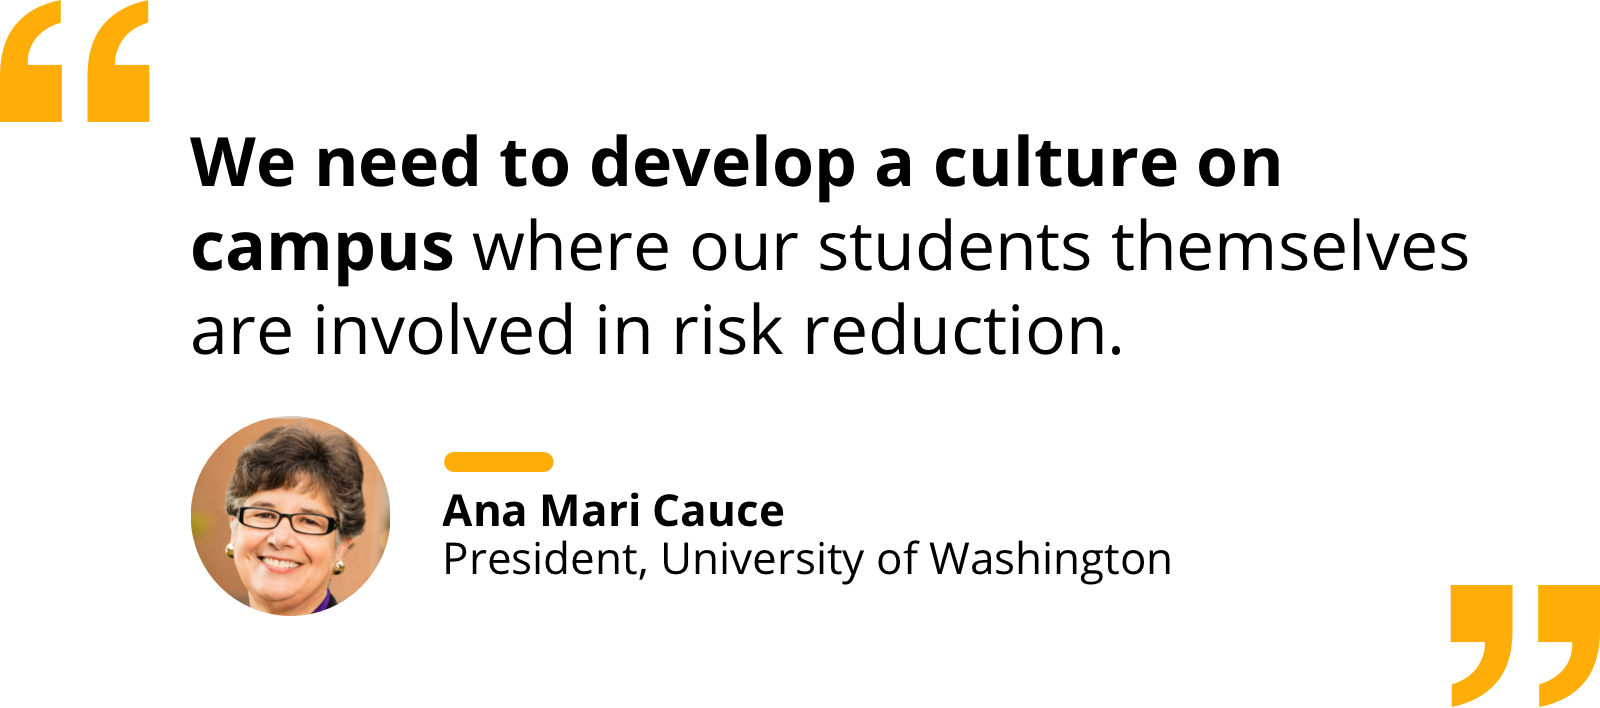 Quote by Ana Mari Cauce re: developing a campus culture where students are involved in risk reduction.